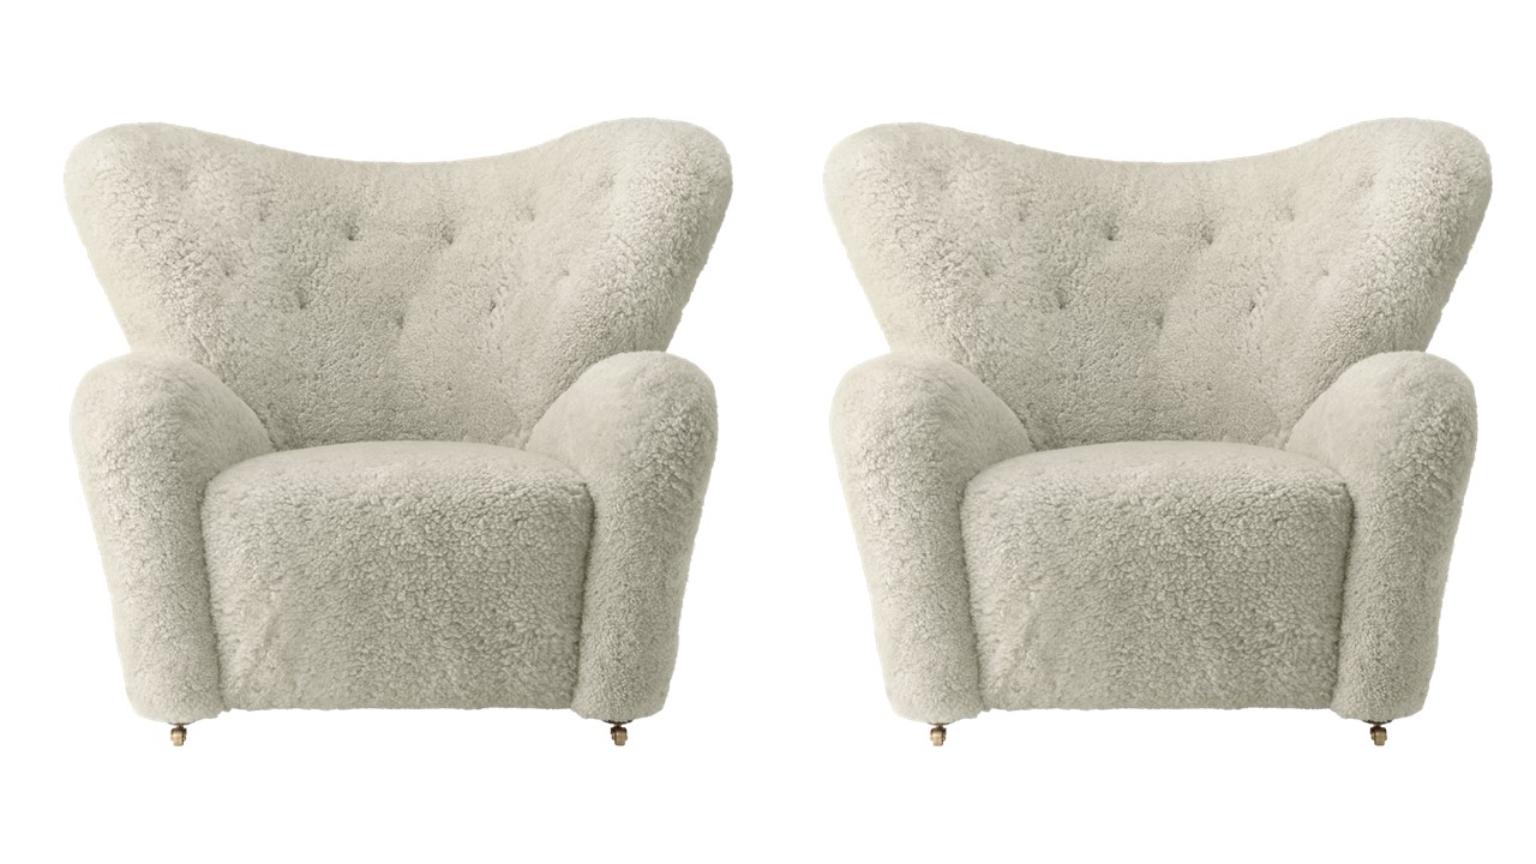 Set of 2 green tea sheepskin The Tired Man Lounge chair by Lassen
Dimensions: W 102 x D 87 x H 88 cm 
Materials: Sheepskin

Flemming Lassen designed the overstuffed easy chair, The Tired Man, for The Copenhagen Cabinetmakers’ Guild Competition